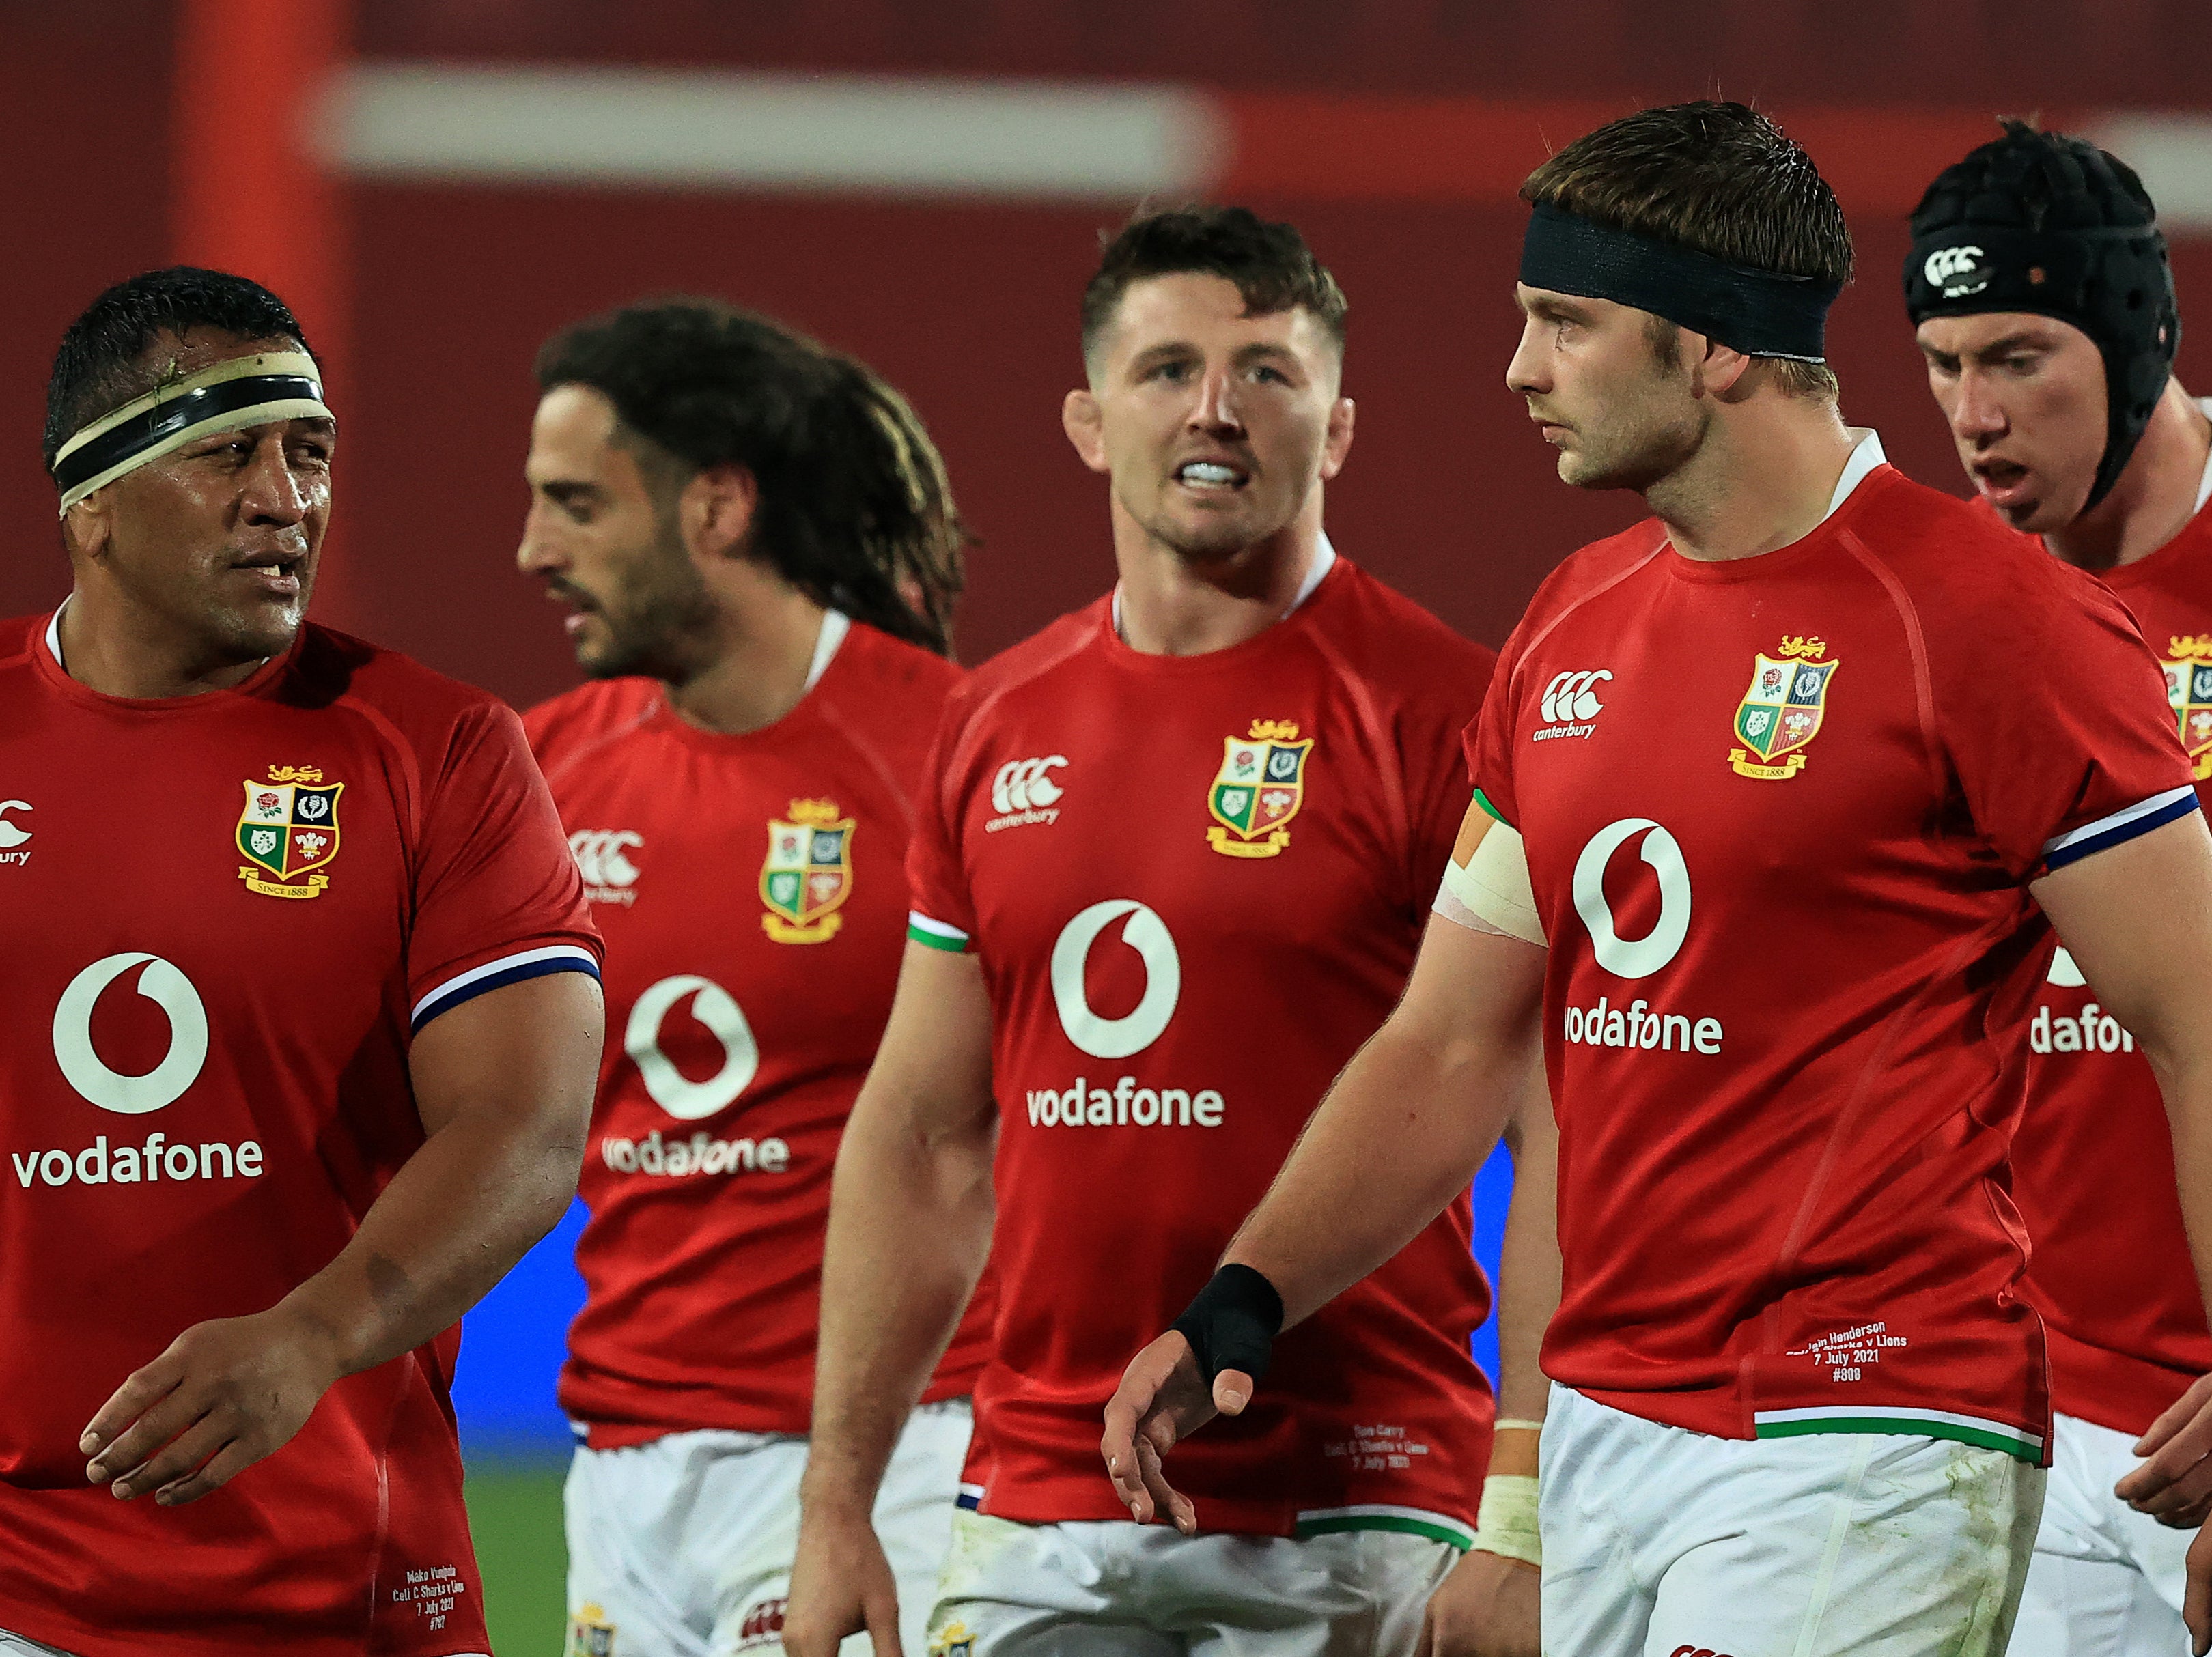 Lions players after their win against the Sharks